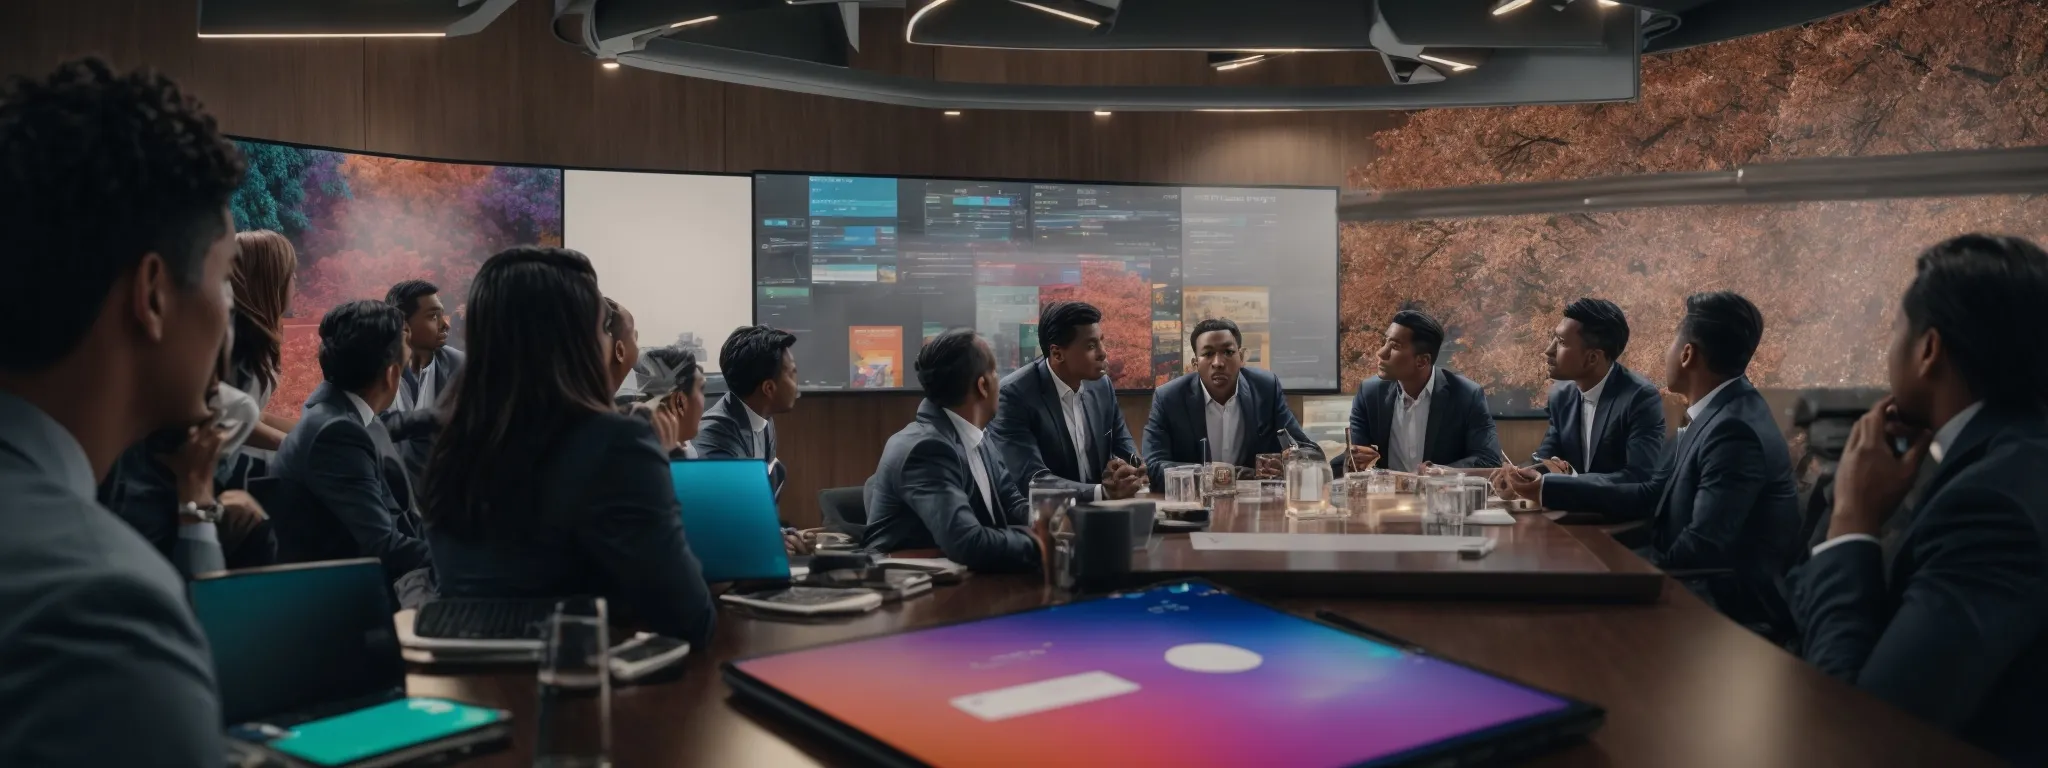 a group of professionals gathered around a conference table, brainstorming with a large screen displaying colorful social media analytics in the background.